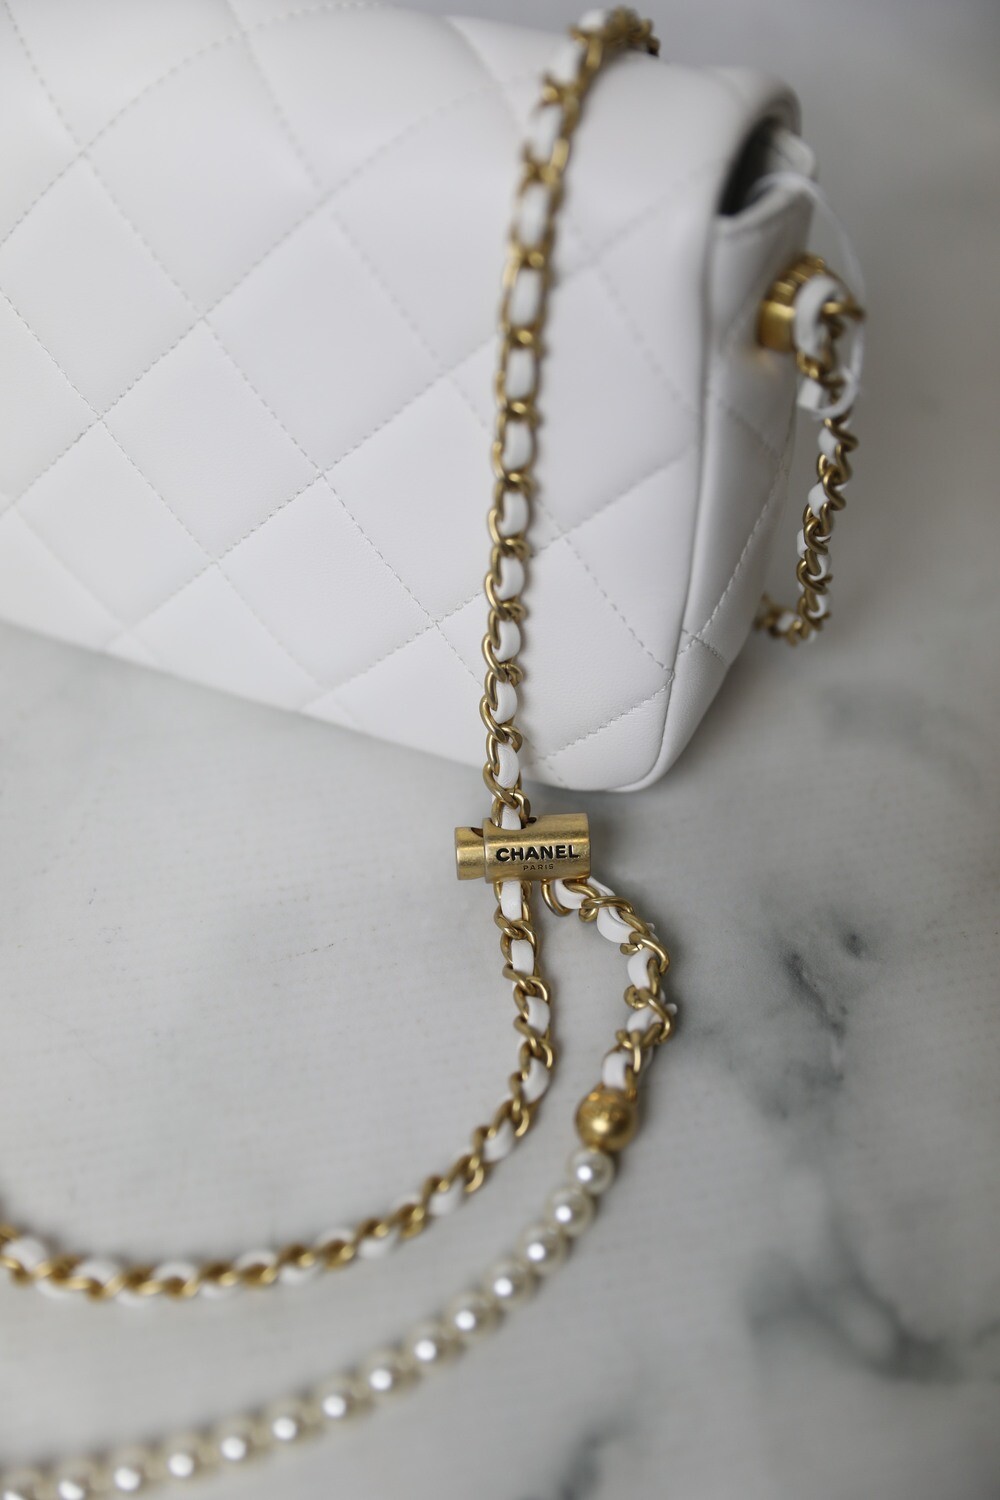 Chanel Seasonal Flap Bag, My Perfect Mini, White Lambskin Leather, Gold  Hardware, Pearl and Leather Strap, New in Box